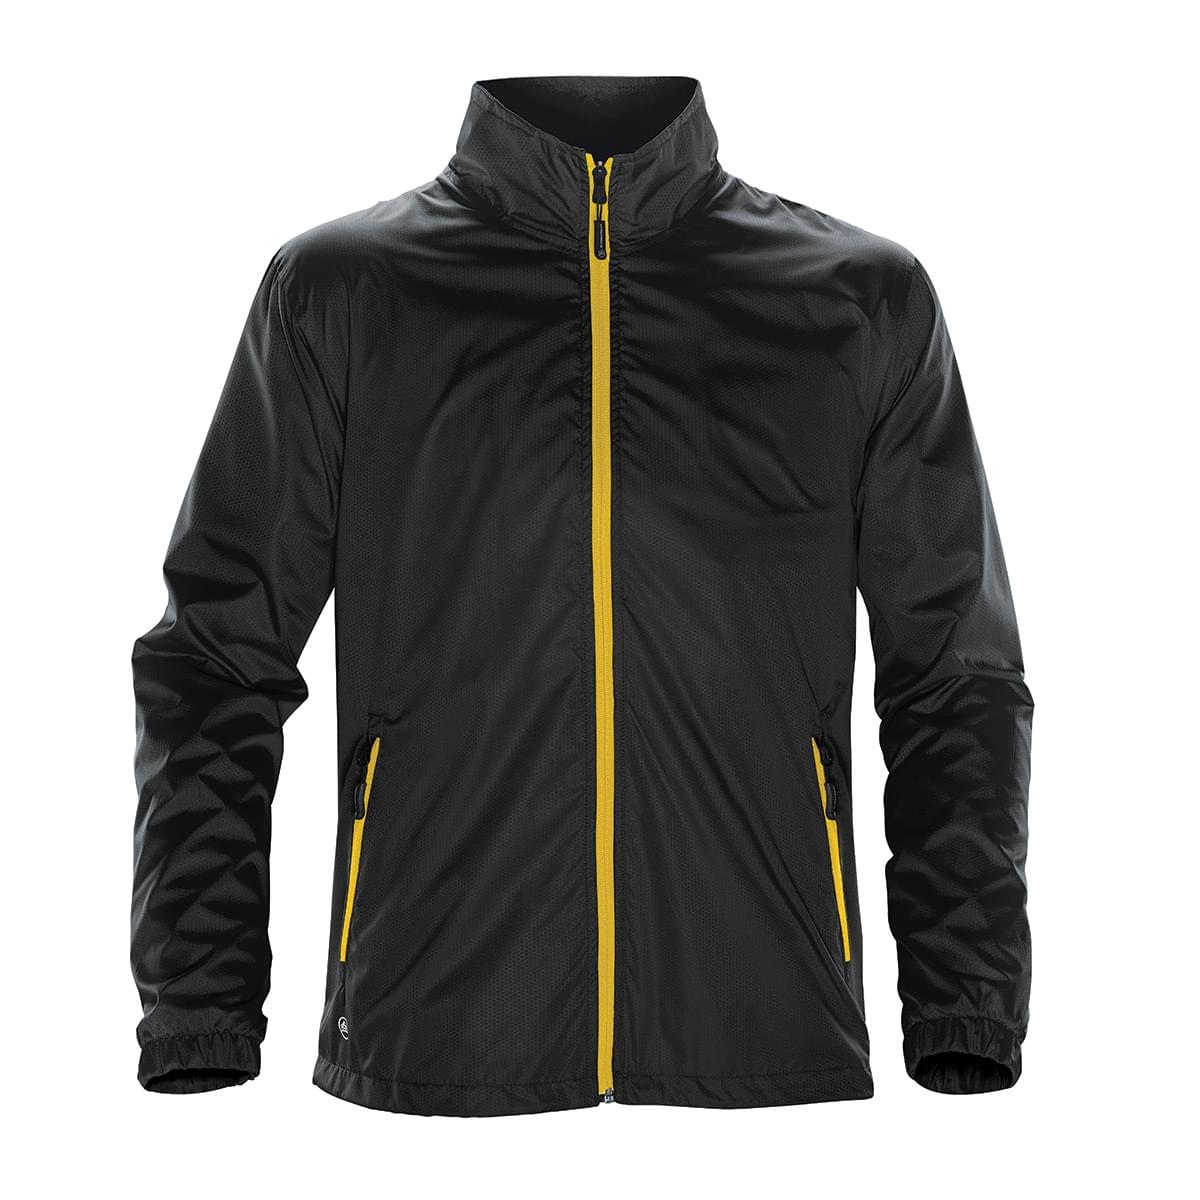 Youth's Stavanger Thermal Jacket - Stormtech USA Retail